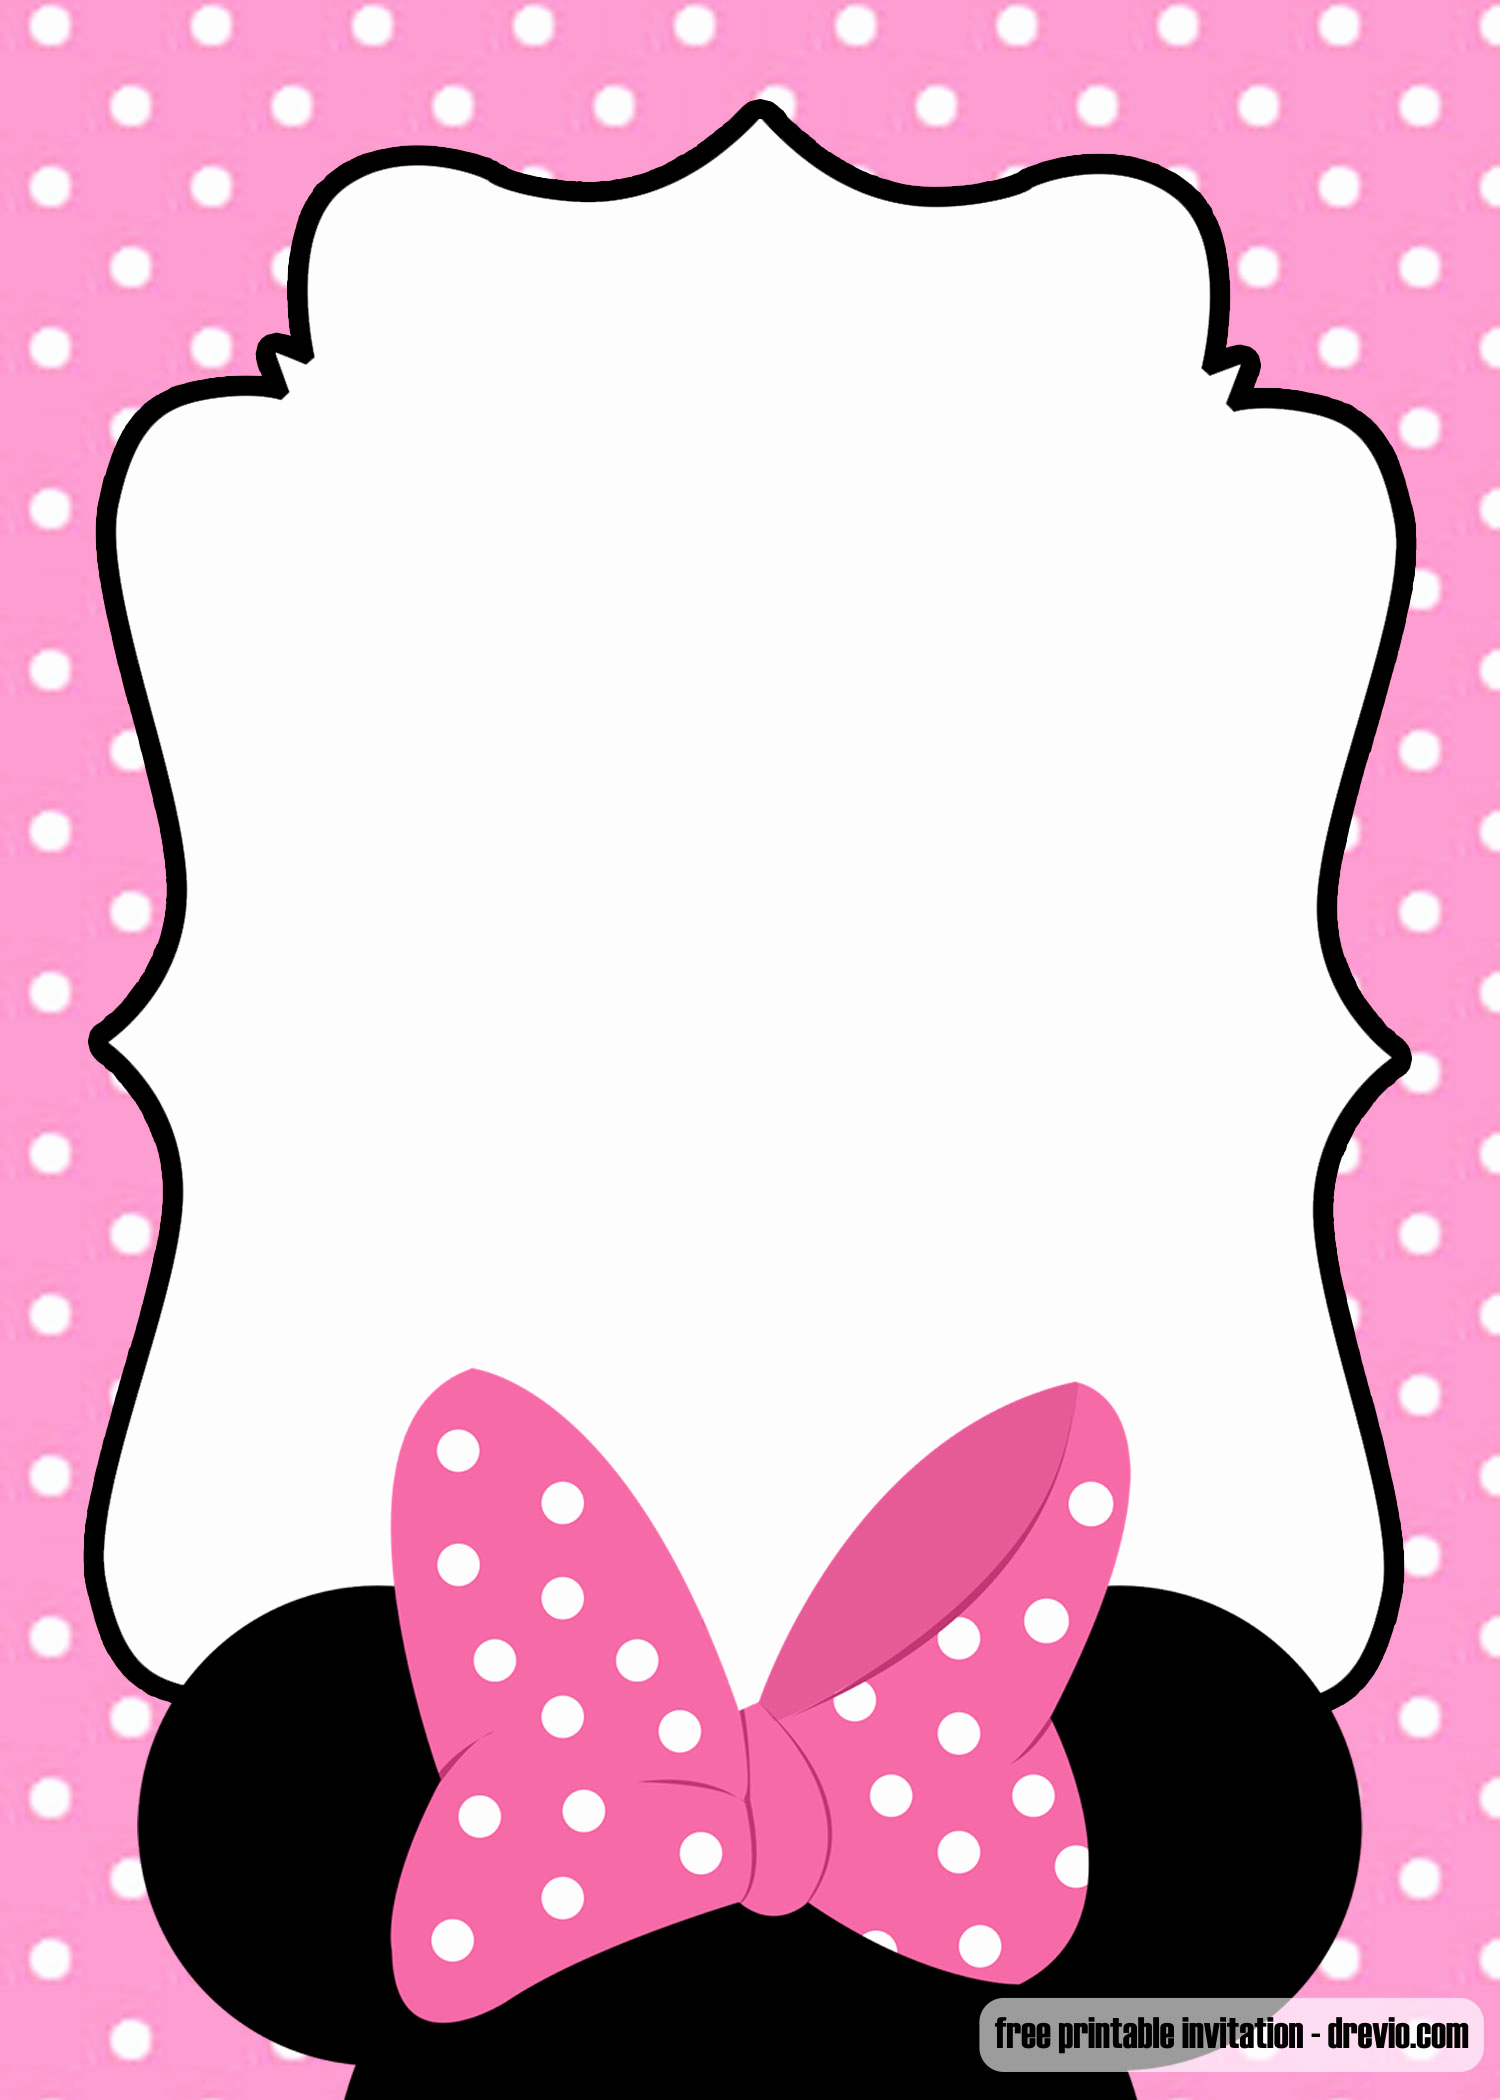 Minnie Mouse Invitation Template Free Best Of Free Polka Dot Pink Minnie Mouse Invitation Template